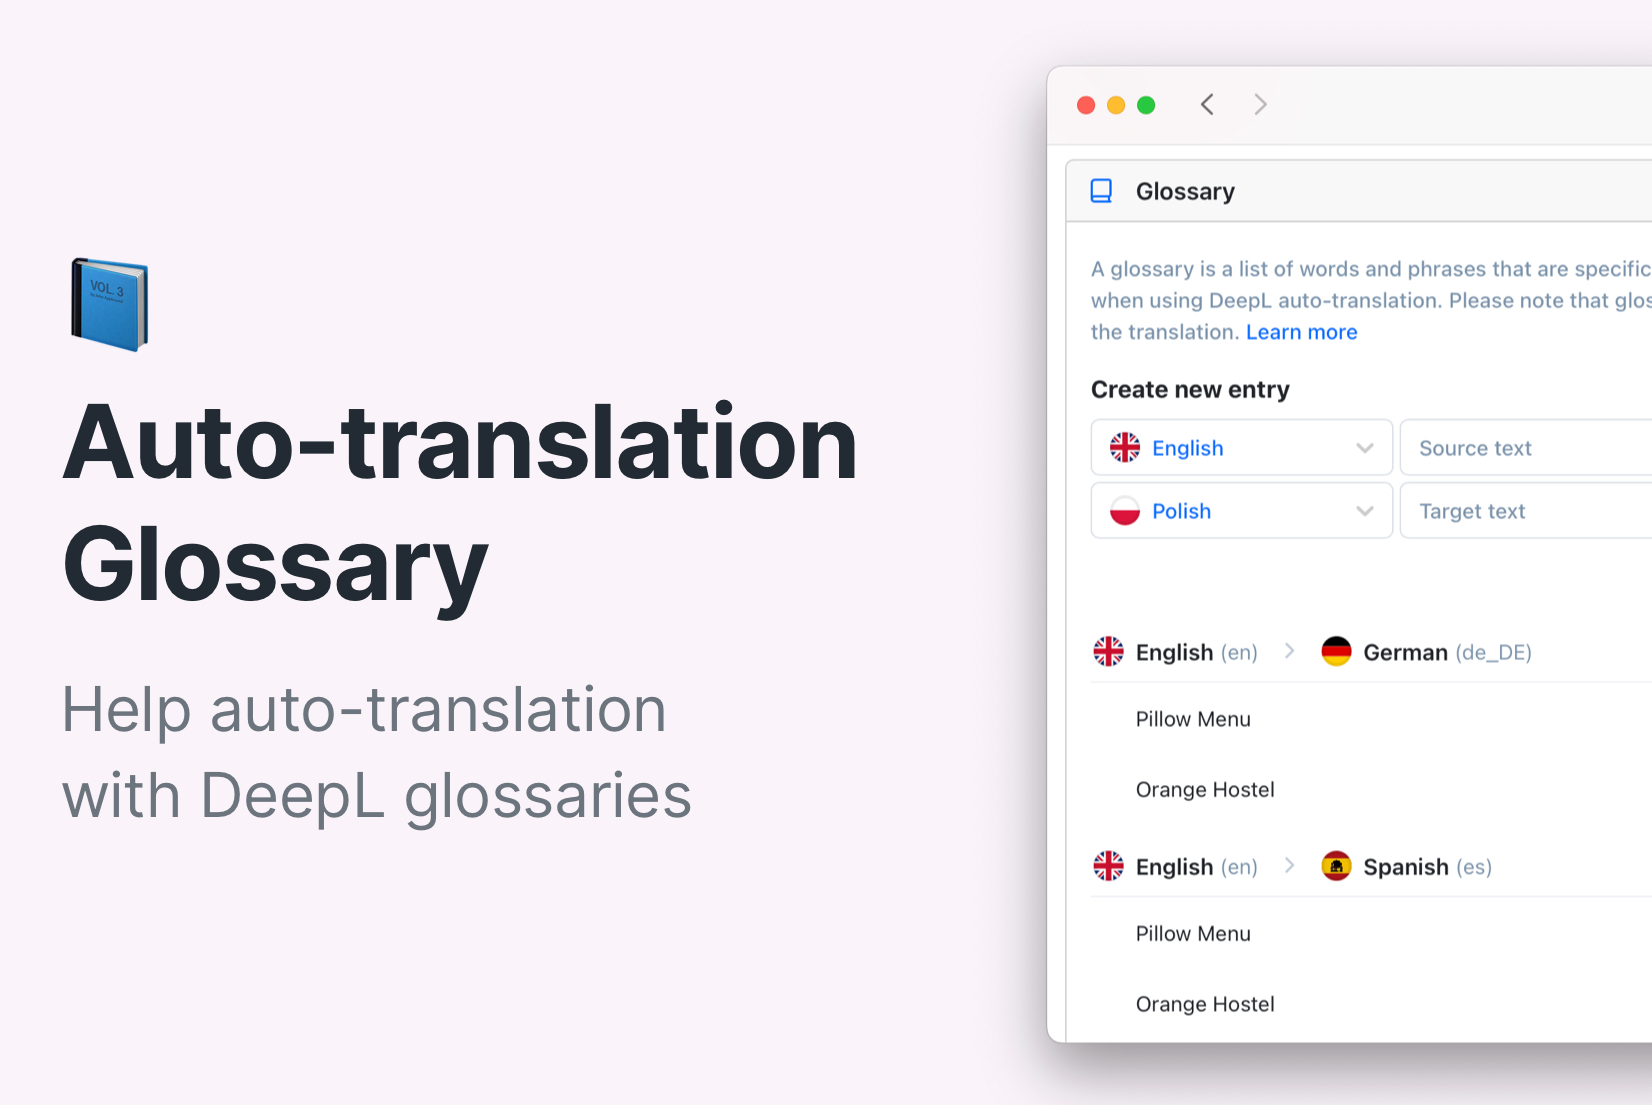 DeepL Glossary in auto-translation: A guide with examples